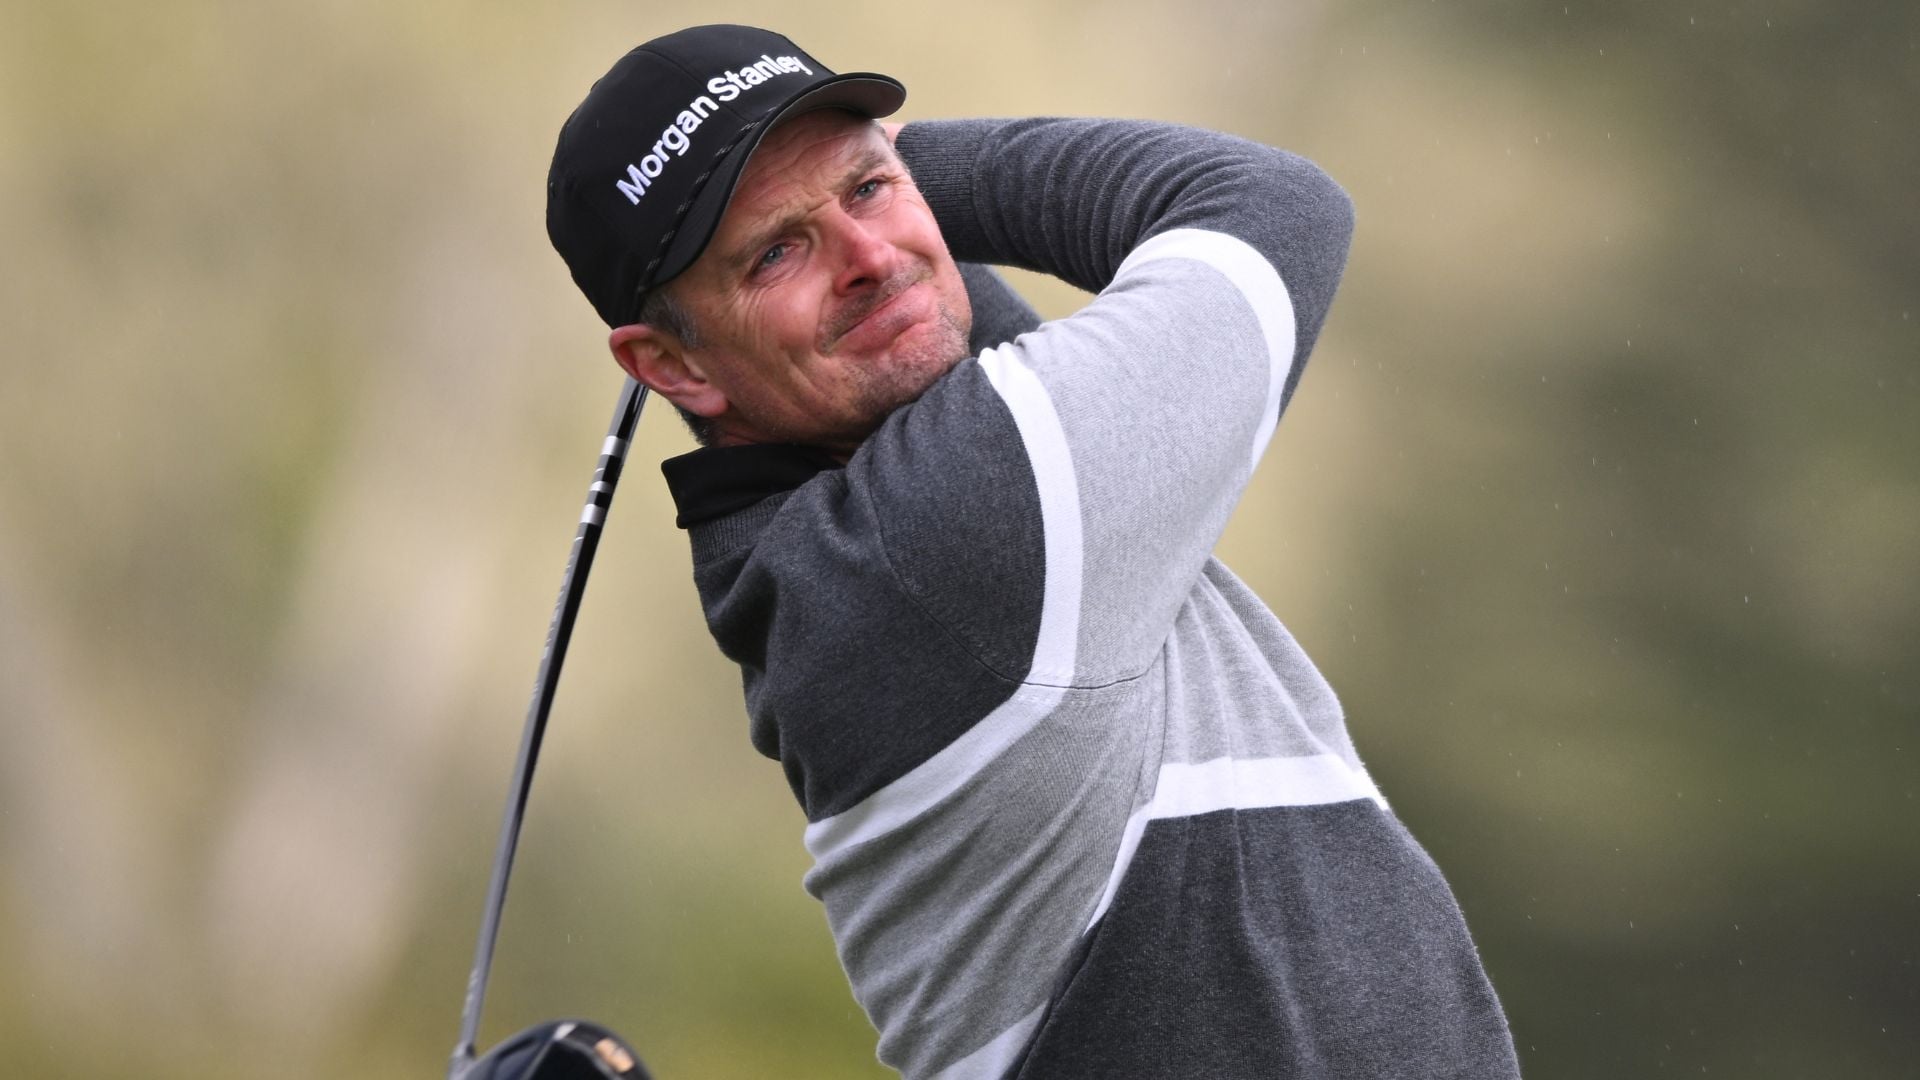 With a Monday finish on tap, Justin Rose eyes first PGA Tour win since 2019 at AT&T Pebble Beach Pro-Am